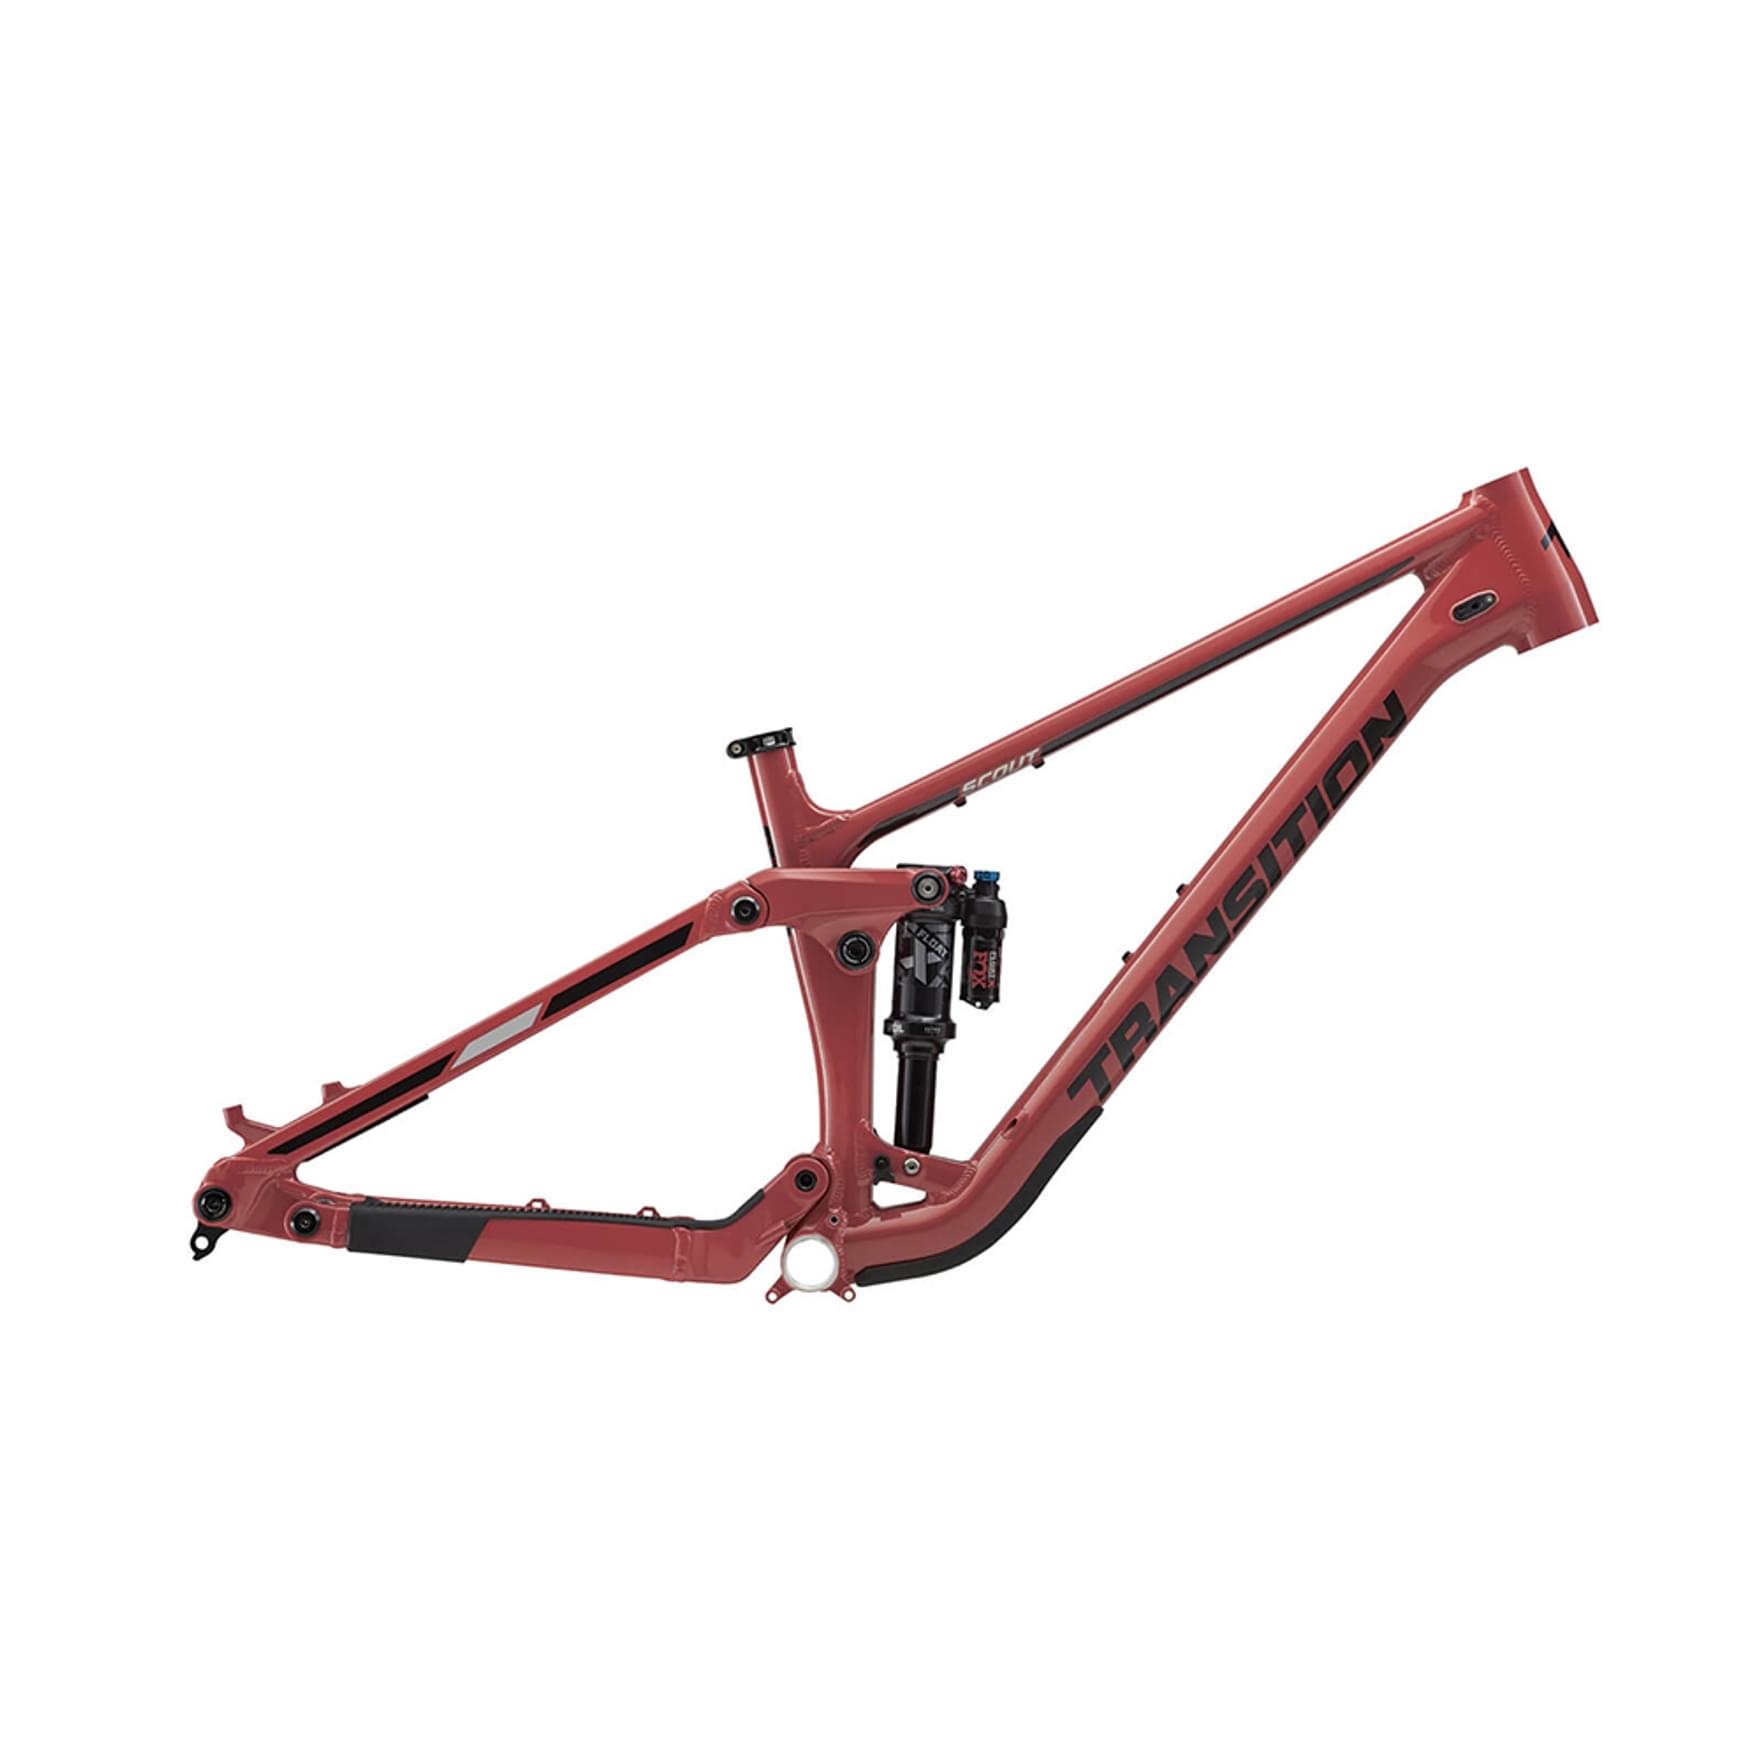 2022 Transition Scout Alloy Frame Rasperry Red